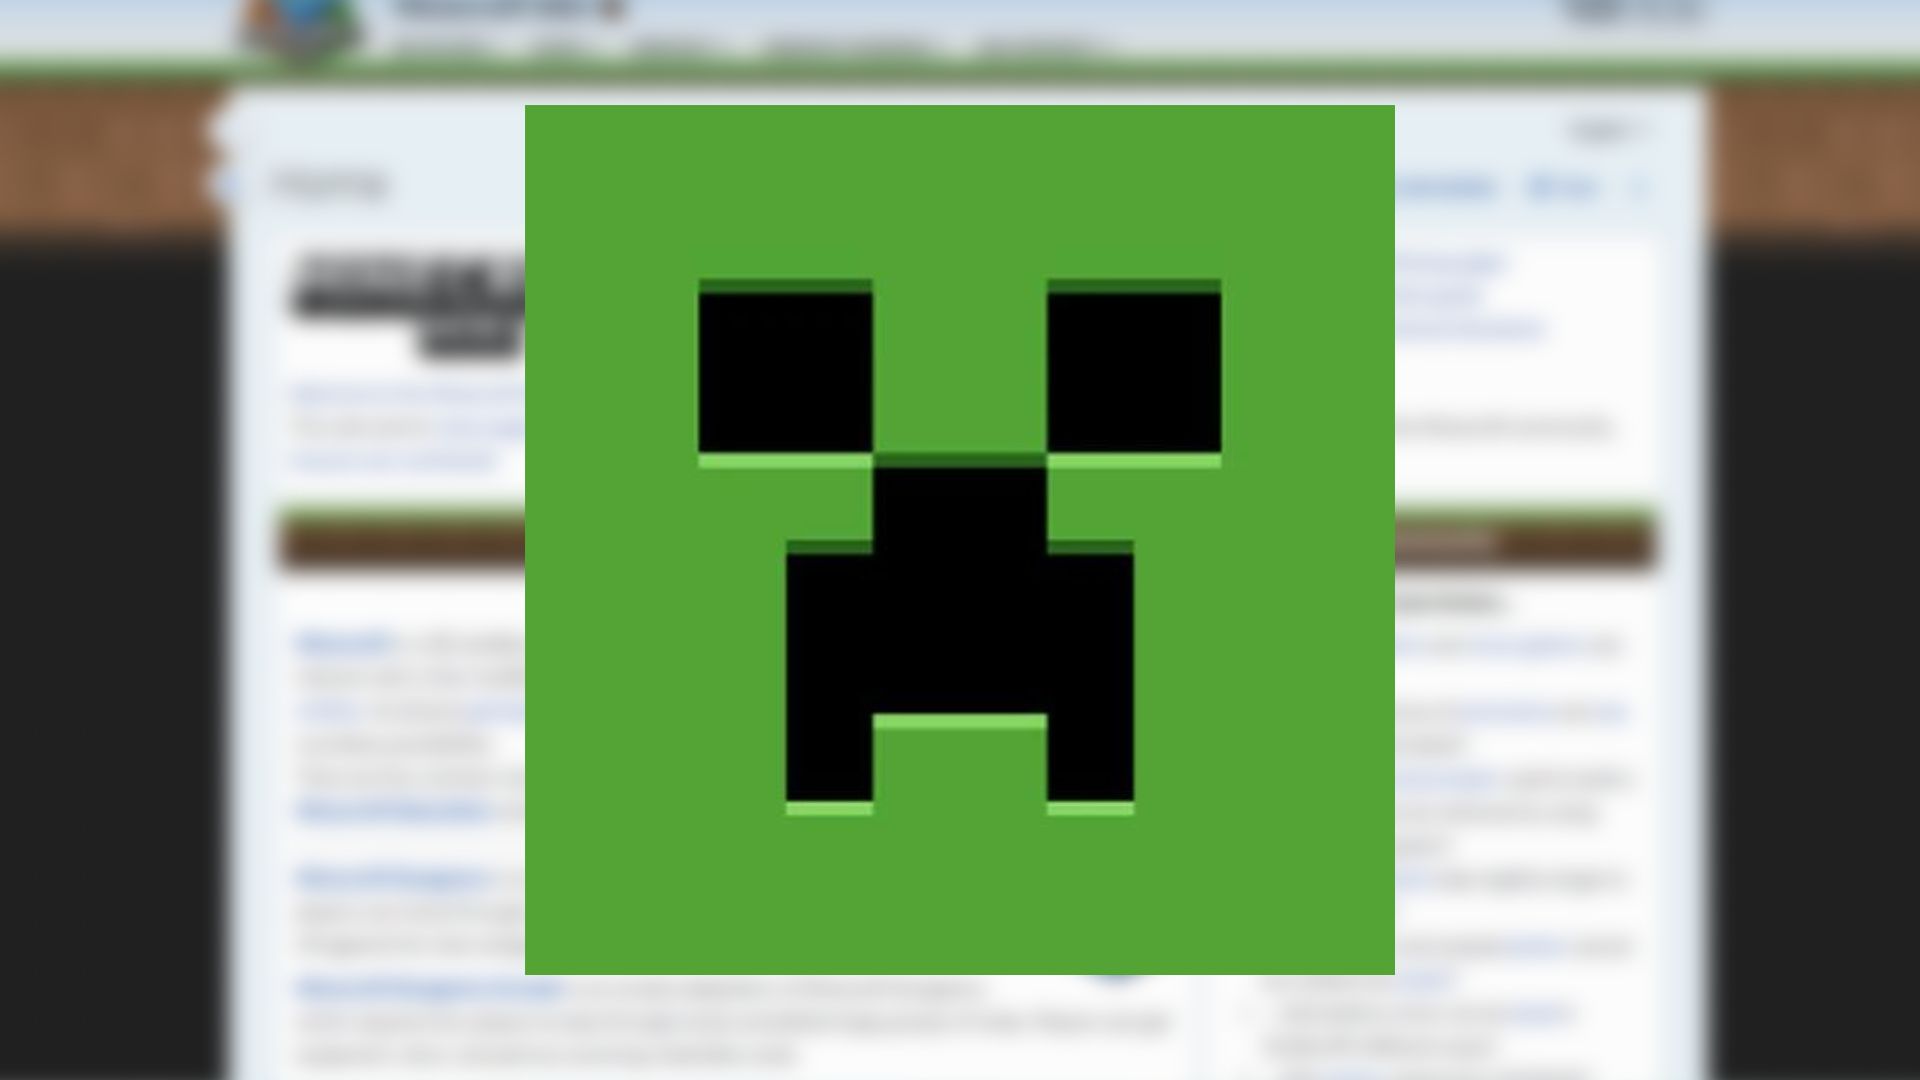 Roblox Minecraft Video Games Wikia, Minecraft, game, action Figure png